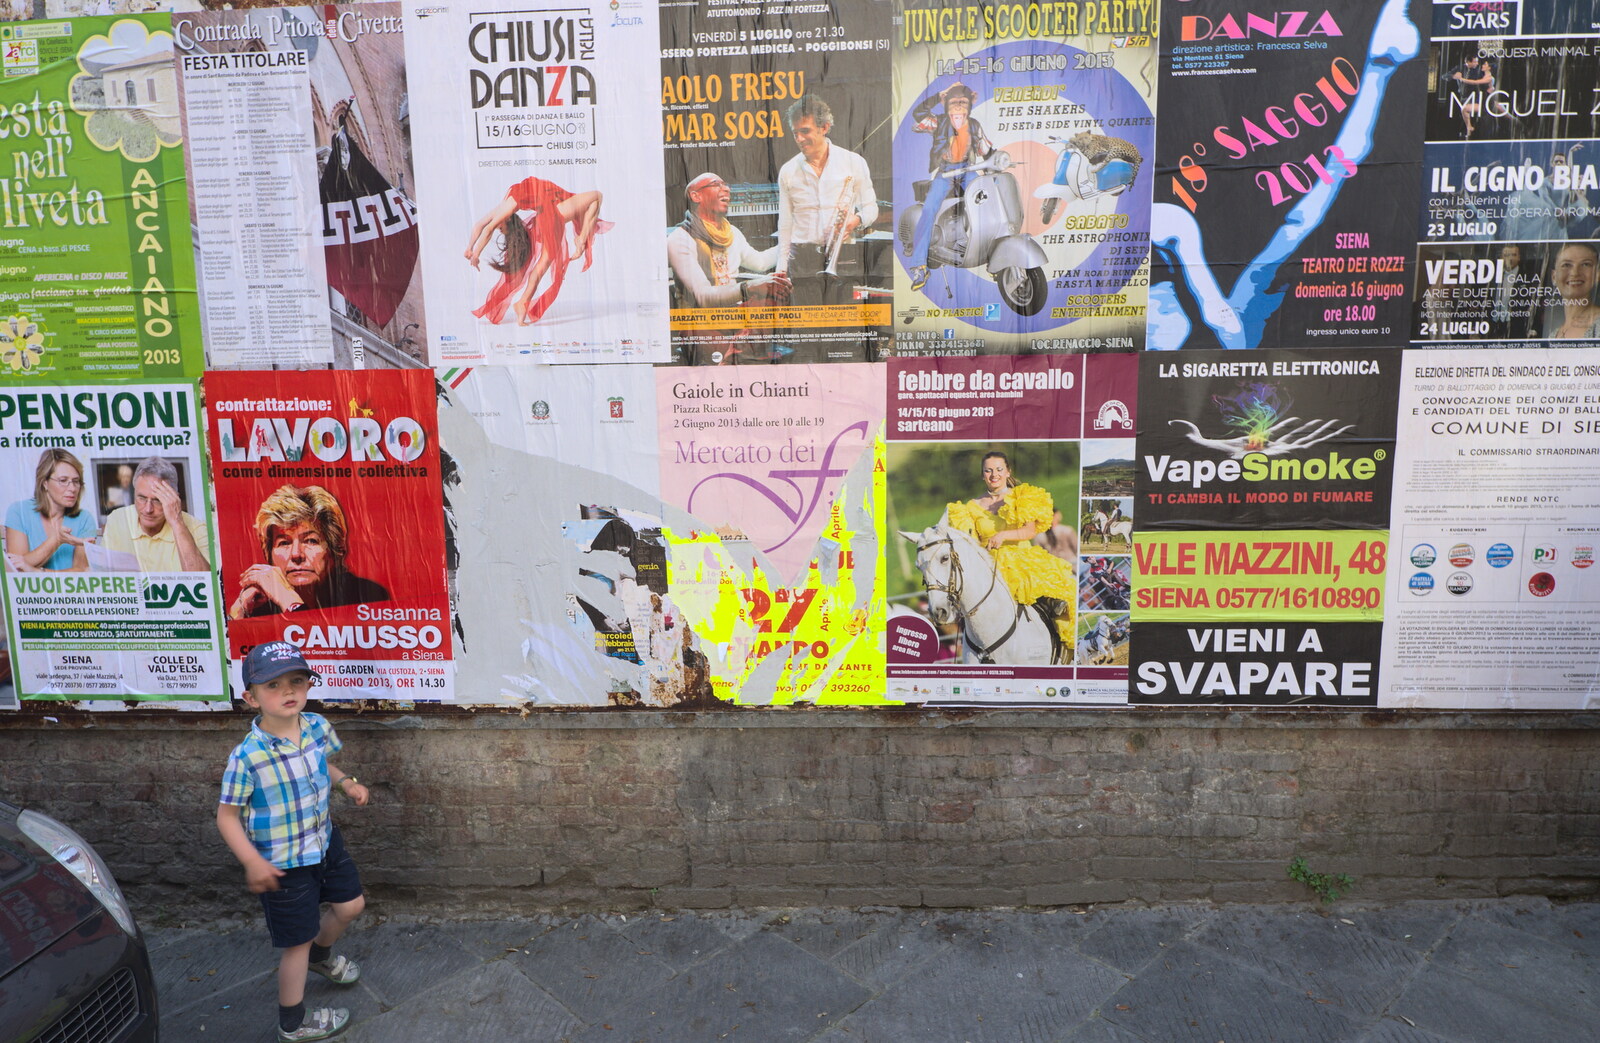 A Tuscan Winery and a Trip to Siena, Tuscany, Italy - 10th June 2013: Fred and a wall of posters